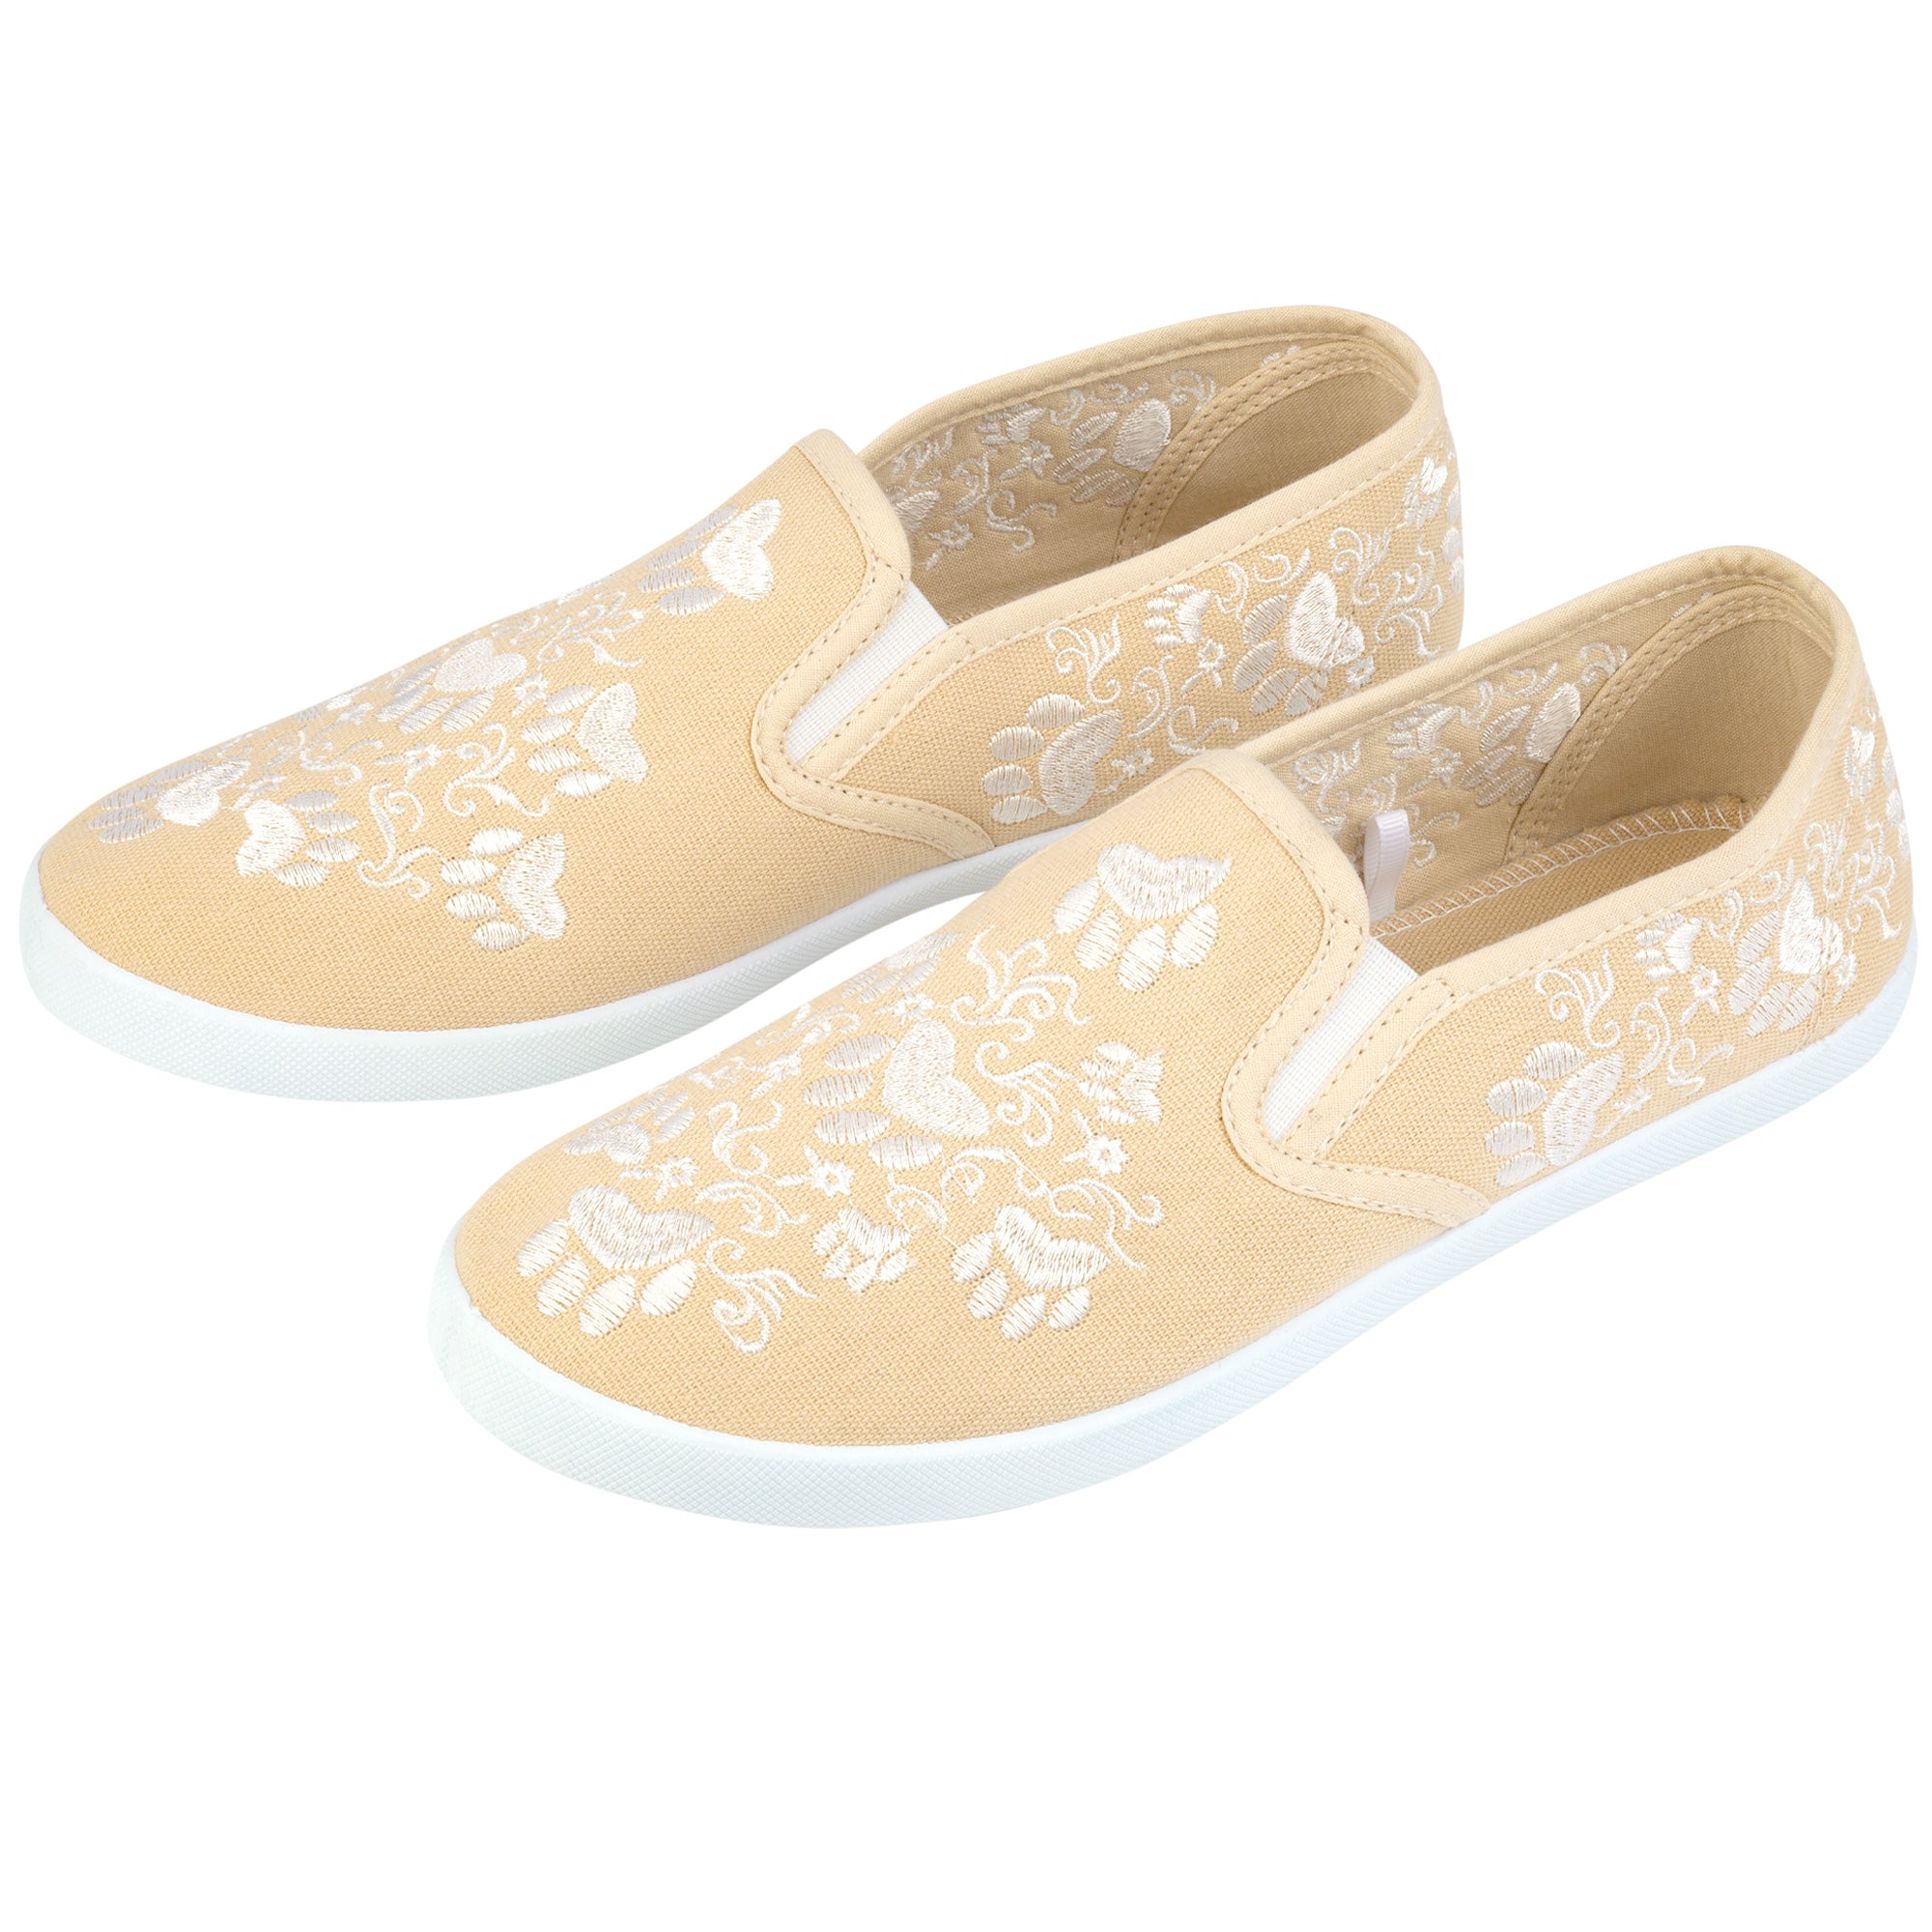 Paws Aplenty Embroidered Canvas Slip-On Shoes - Cream - 10